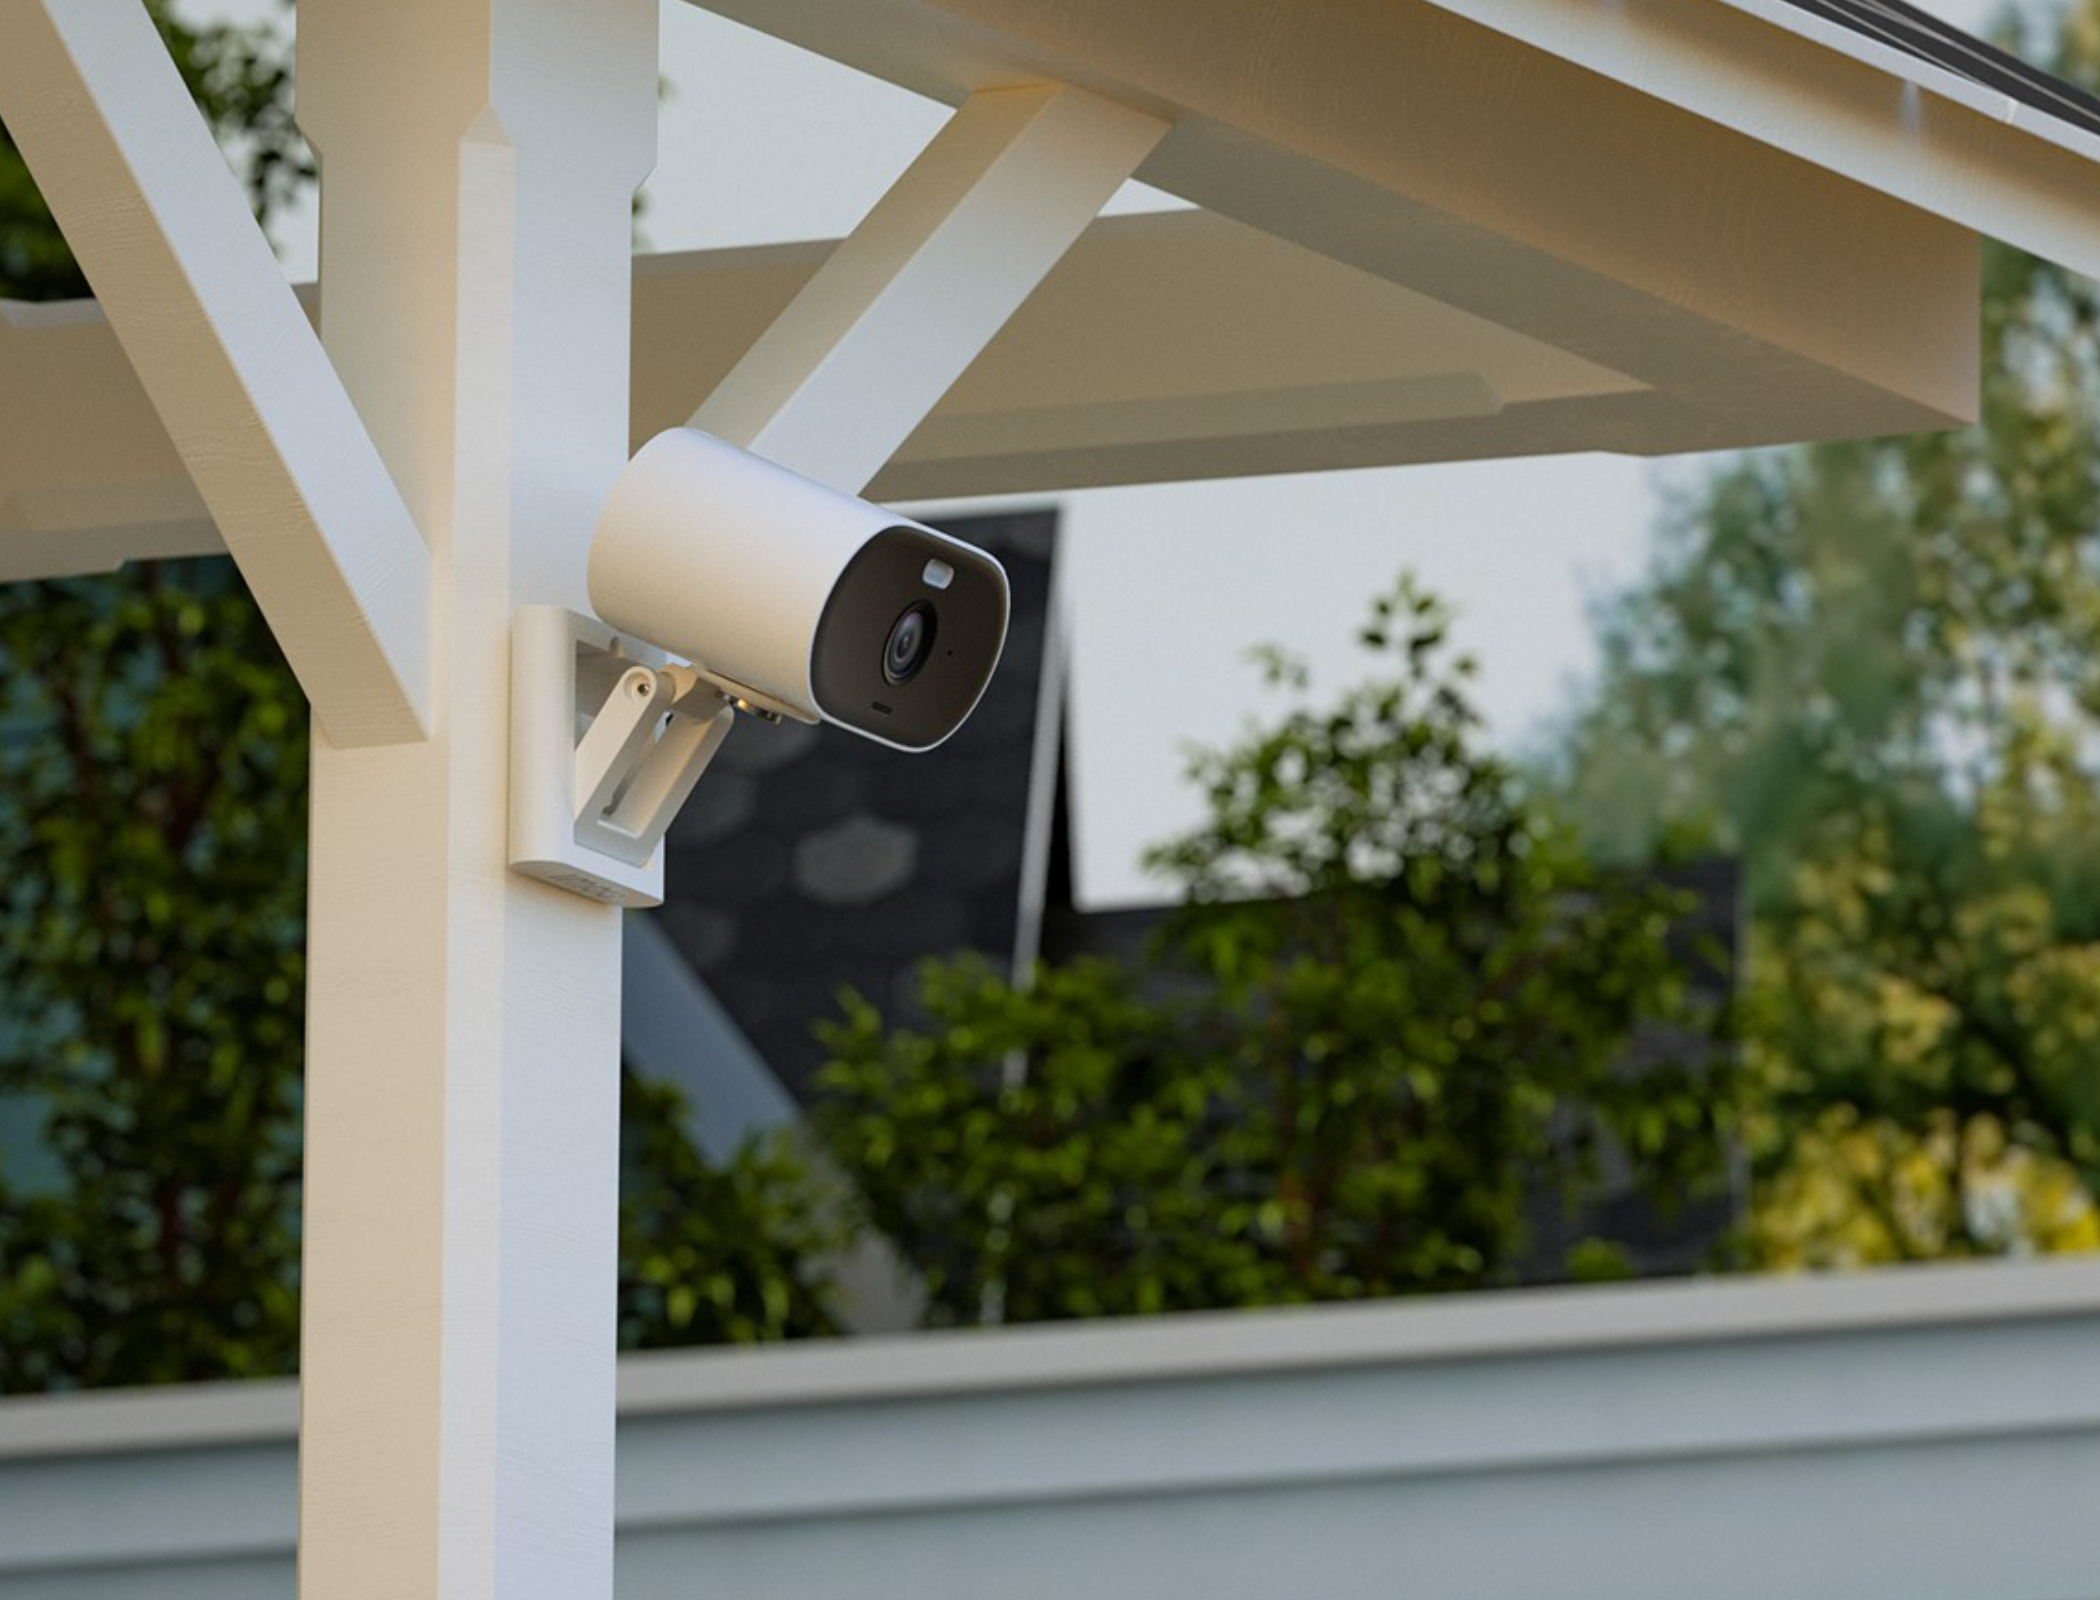 Hands-on review: Imou Versa and Imou Cell Go security cameras